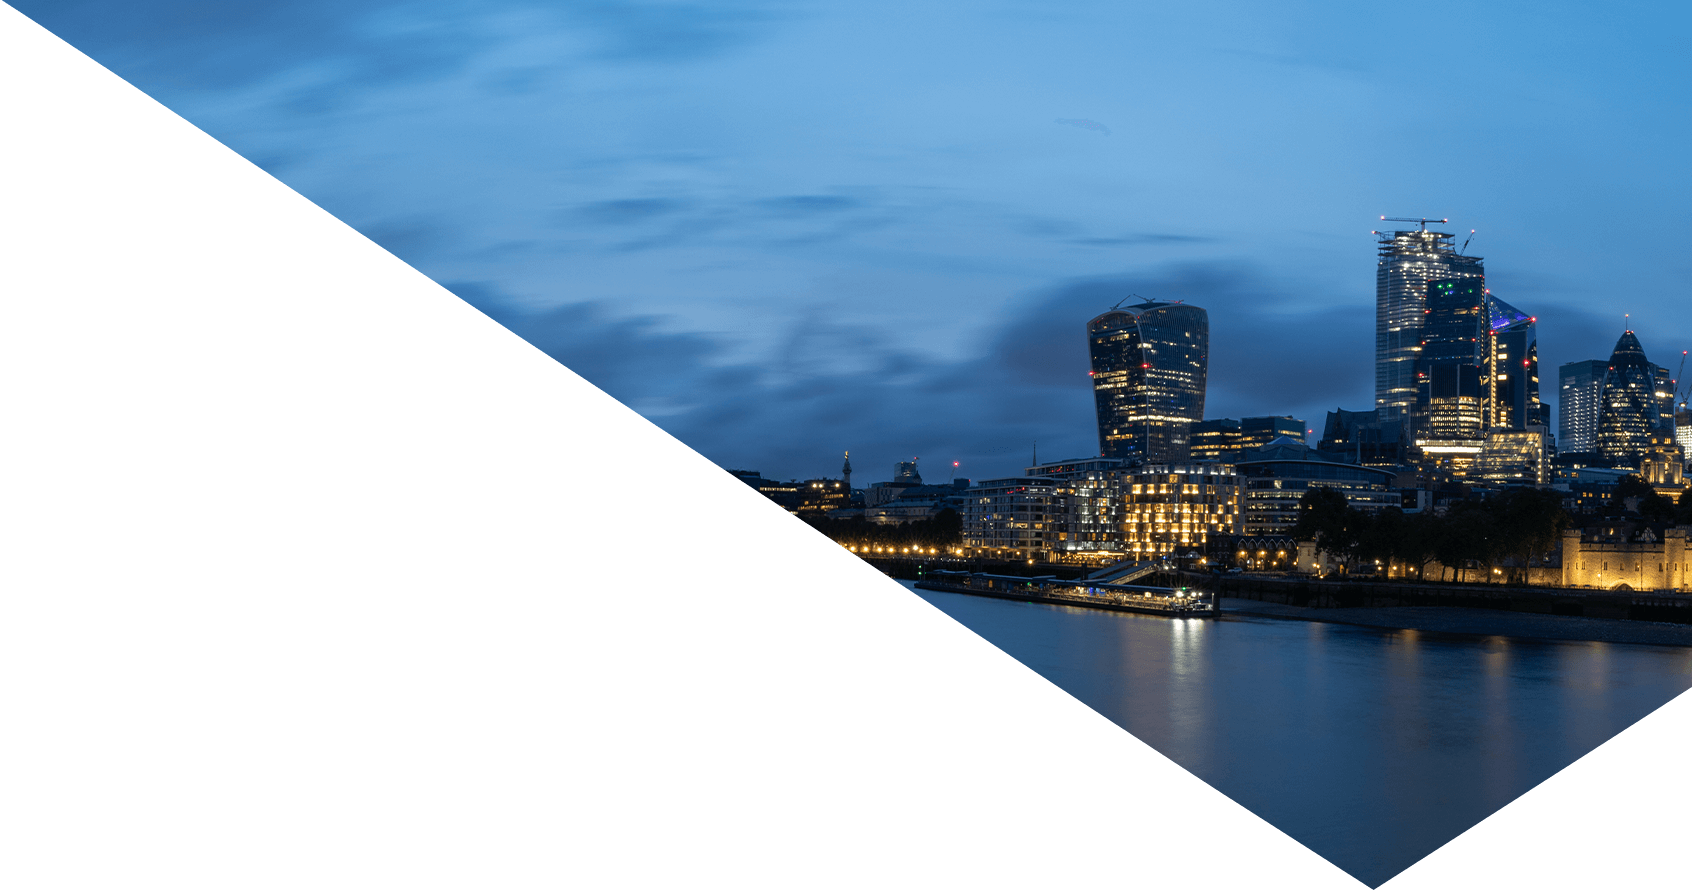 Image showing London skyline at night time